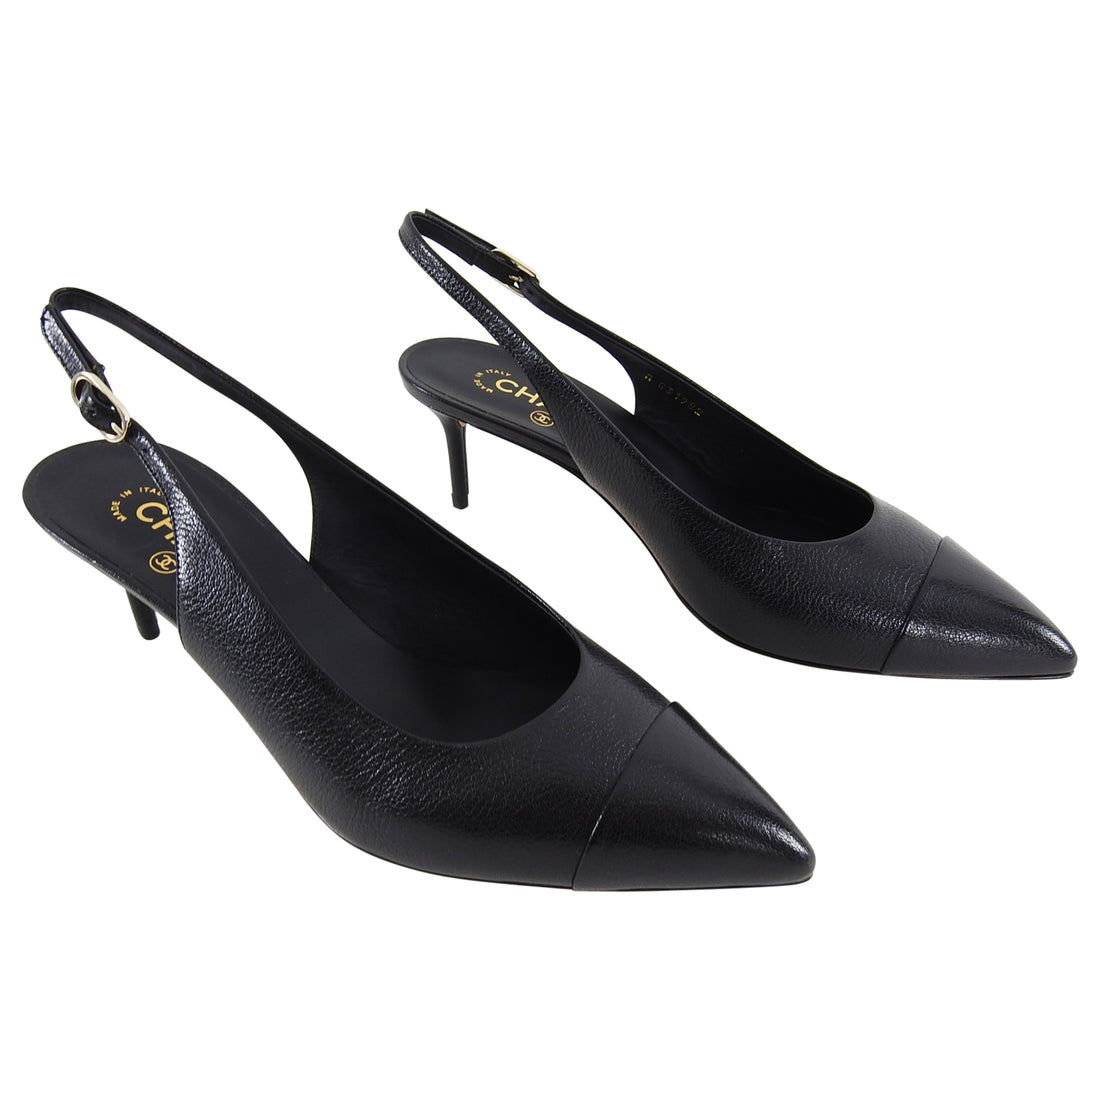 CHANEL #41531 Black Leather Cap Toe Slingback Heels (US 7.5 EU 37.5) – ALL  YOUR BLISS